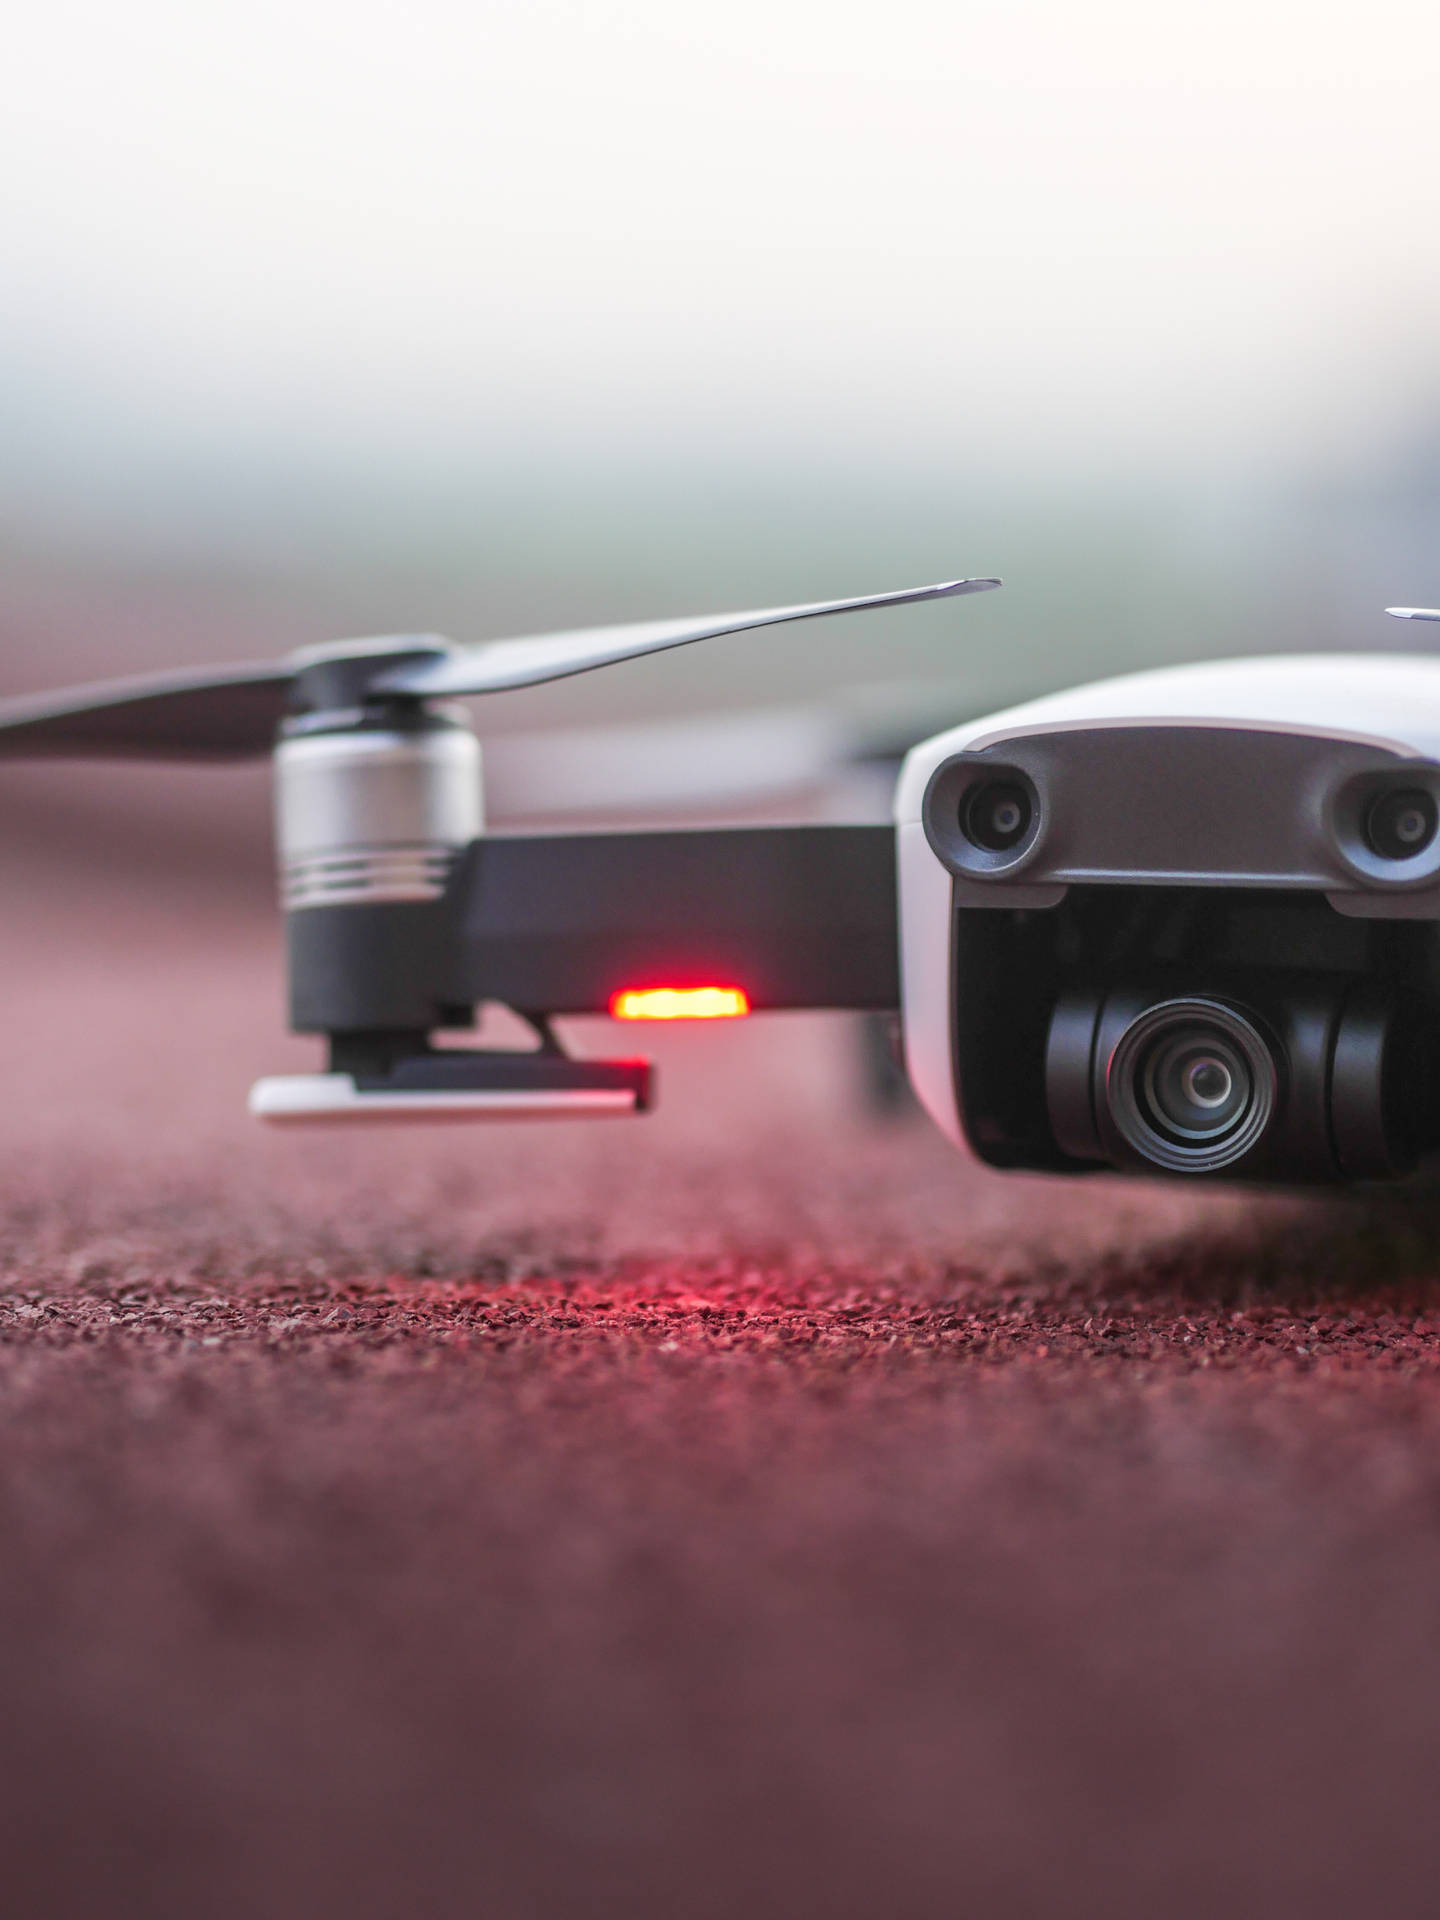 Webcam Drone With Red Light Wallpaper